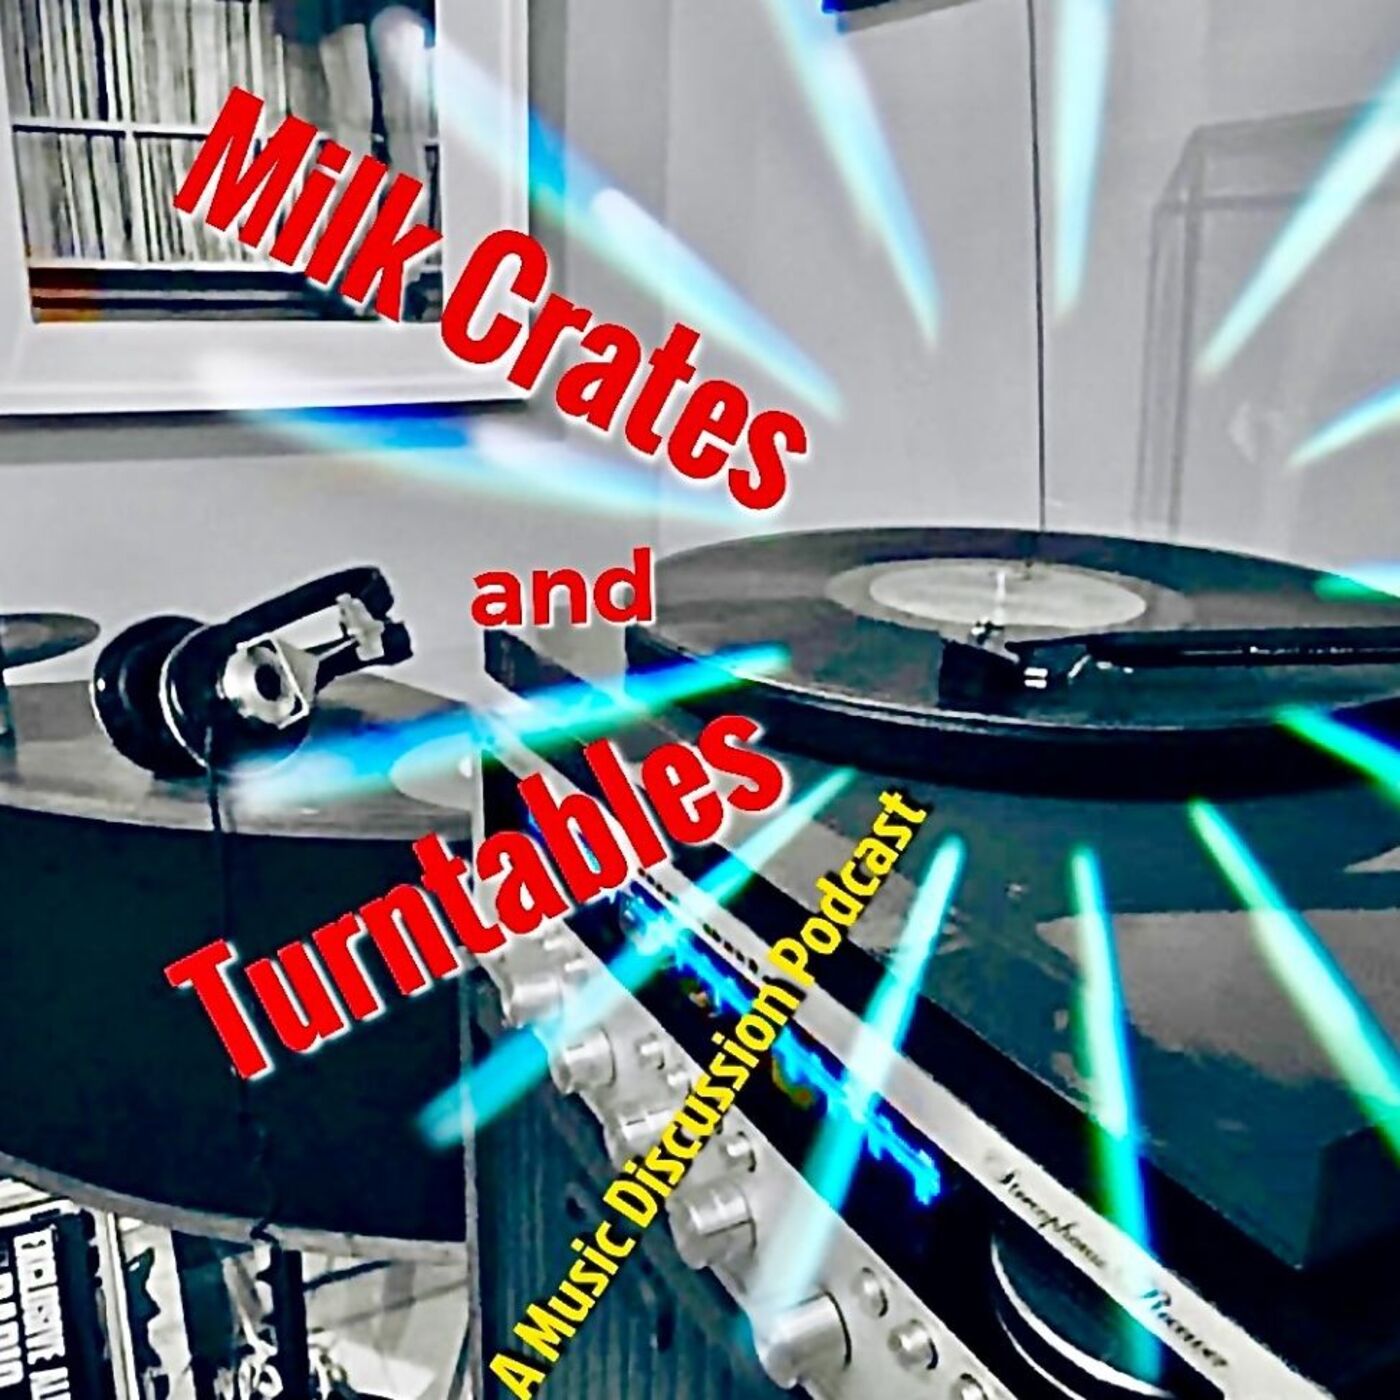 Fresh update on "norway" discussed on Milk Crates and Turntables. A Music Discussion Podcast